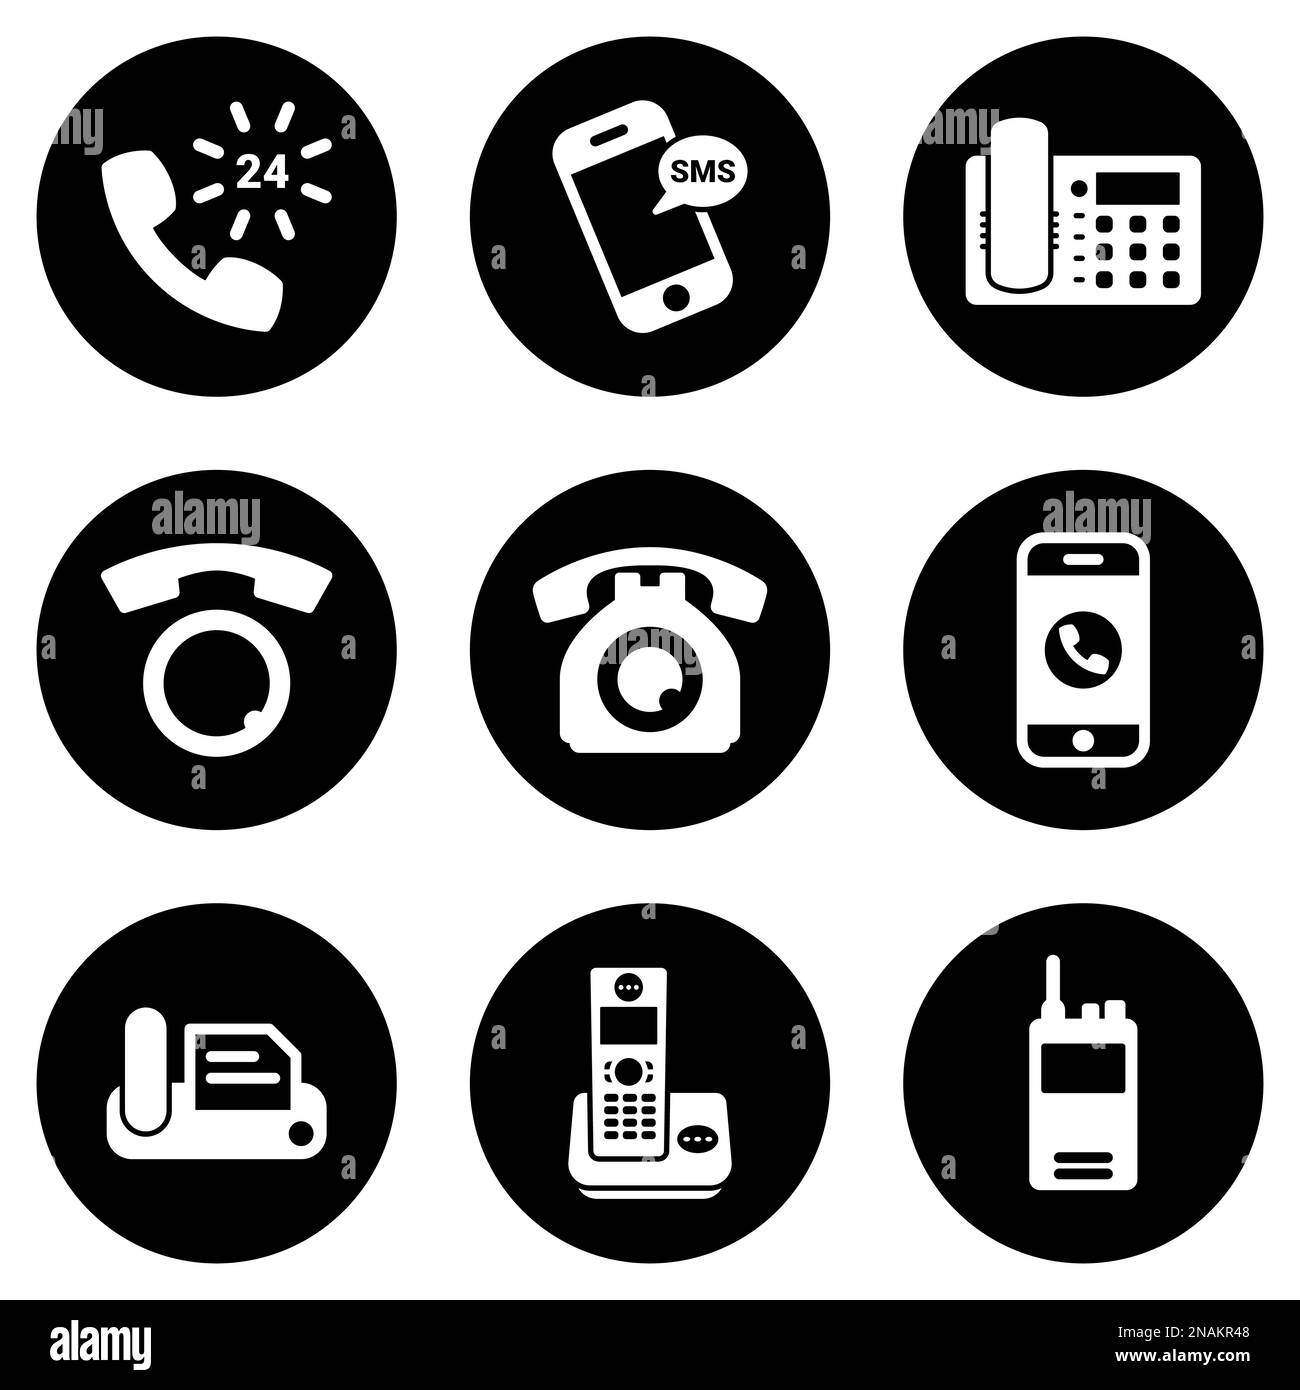 Set of white icons isolated against a black background, on a theme Phone Stock Vector